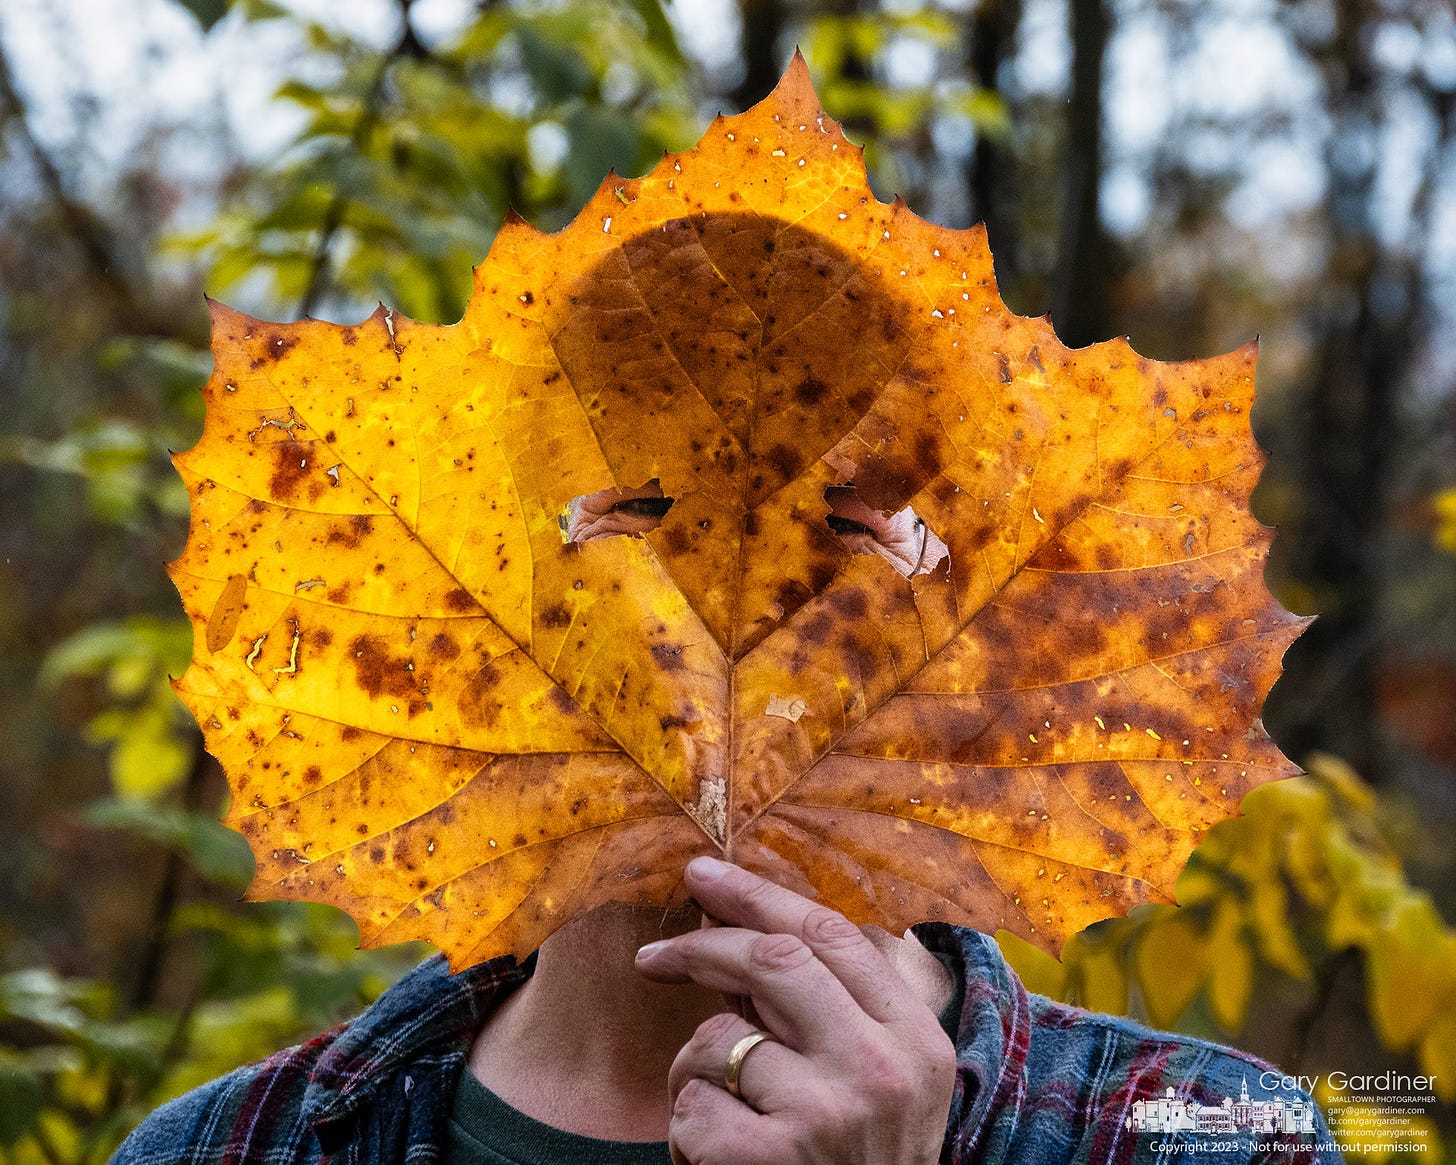 Mark Dilley offered a little humor combining invasives cleanup at Boyer Nature Preserve and a Halloween mask with this large Sycamore tree leaf with eyeholes poke in it. My Final Photo for October 28, 2023.